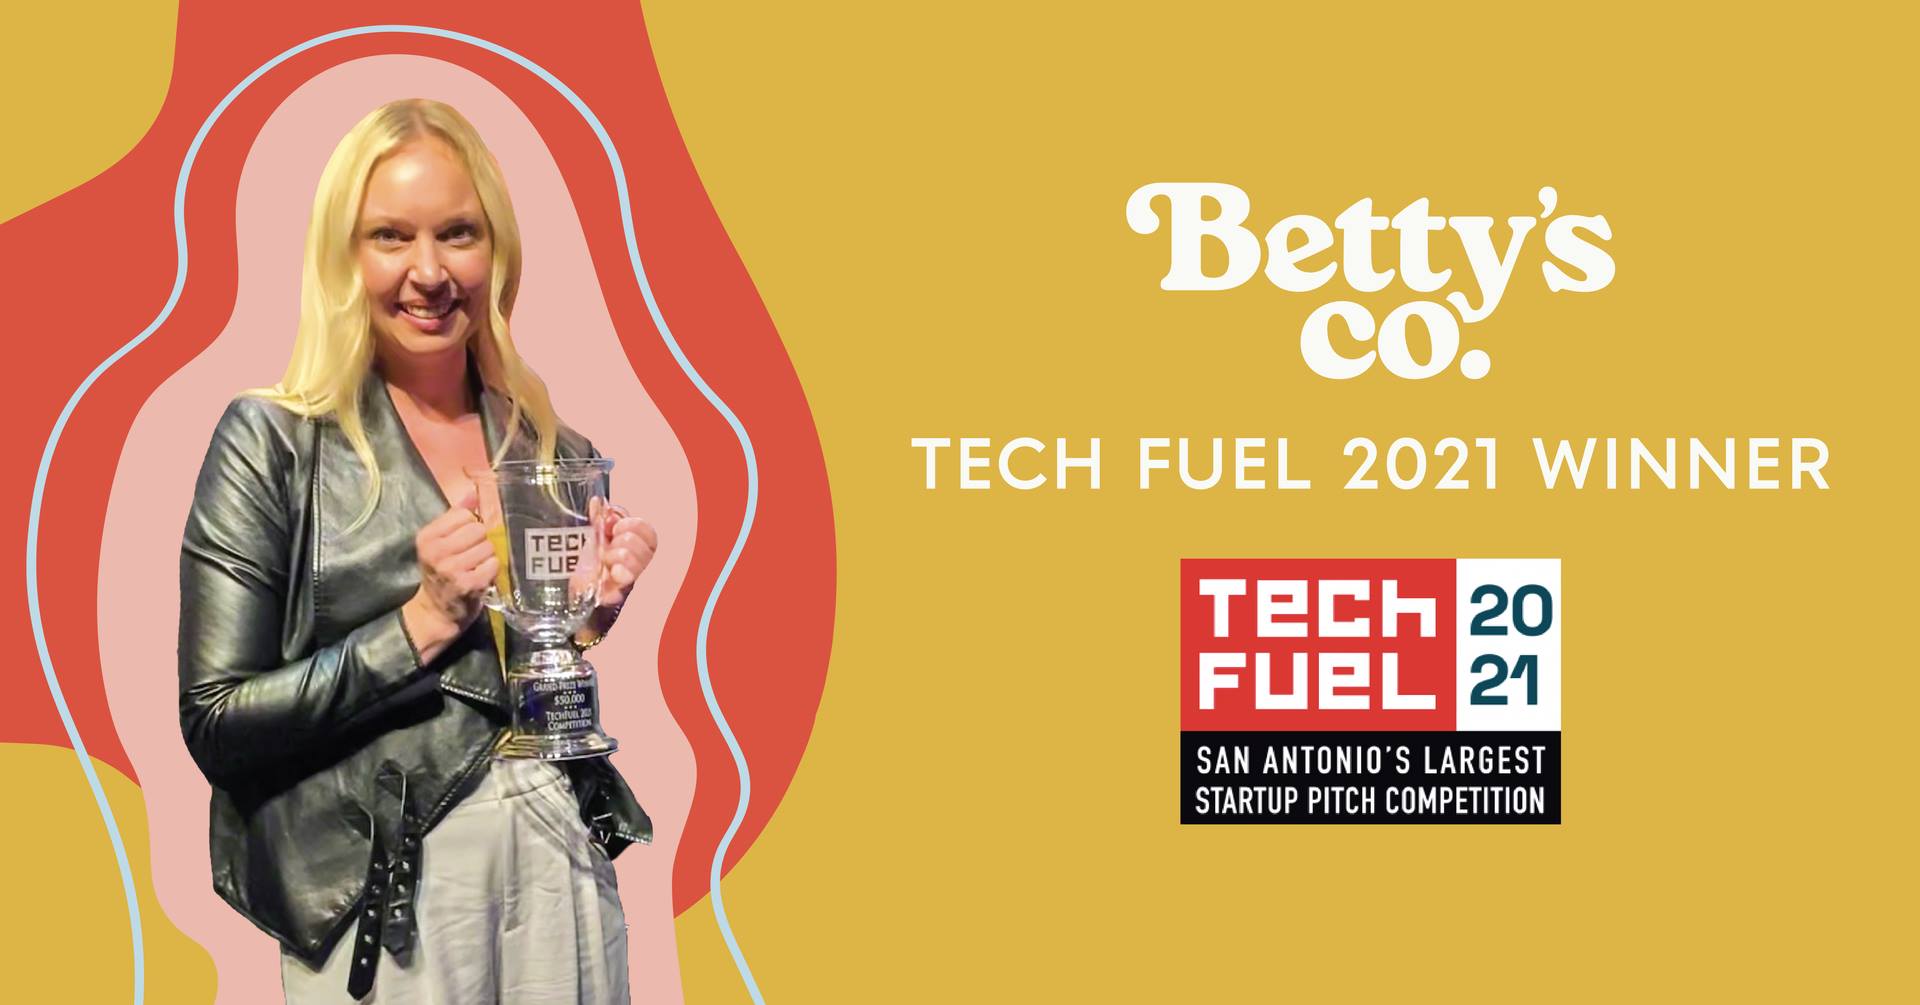 TECH BLOC AND BEXAR COUNTY ANNOUNCE $100,000 STARTUP PITCH COMPETITION - 2022